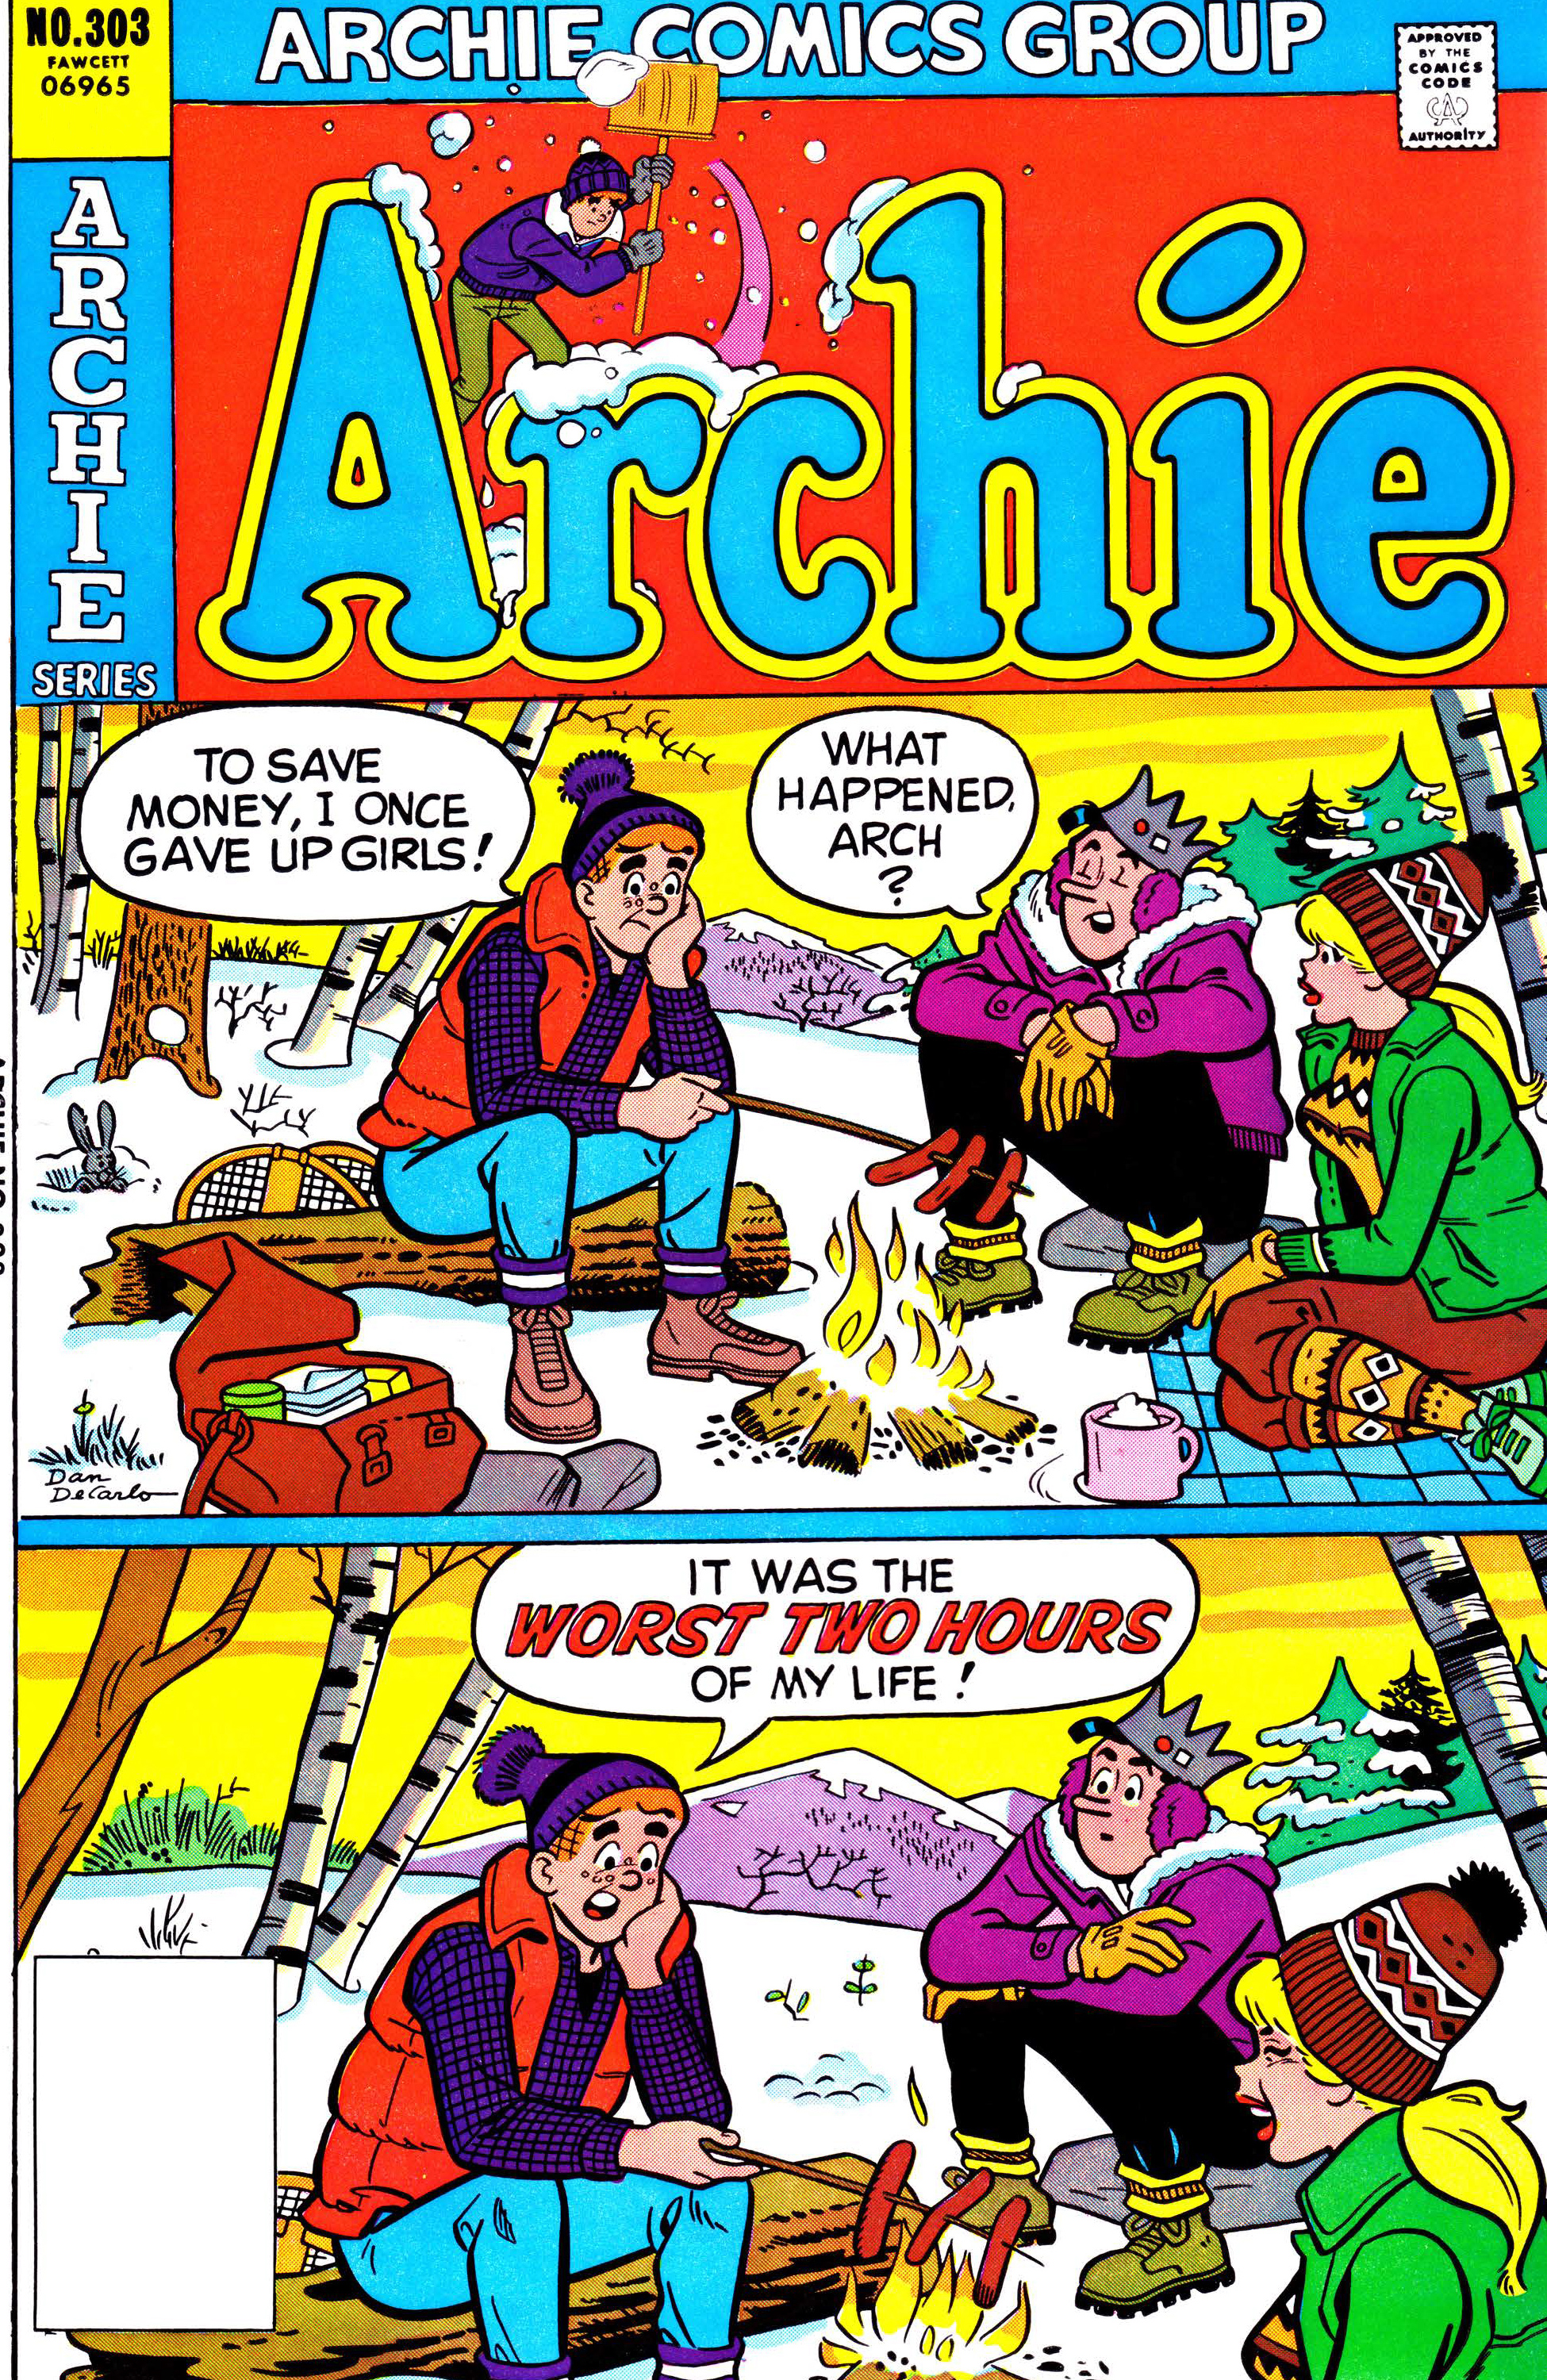 Read online Archie (1960) comic -  Issue #303 - 1